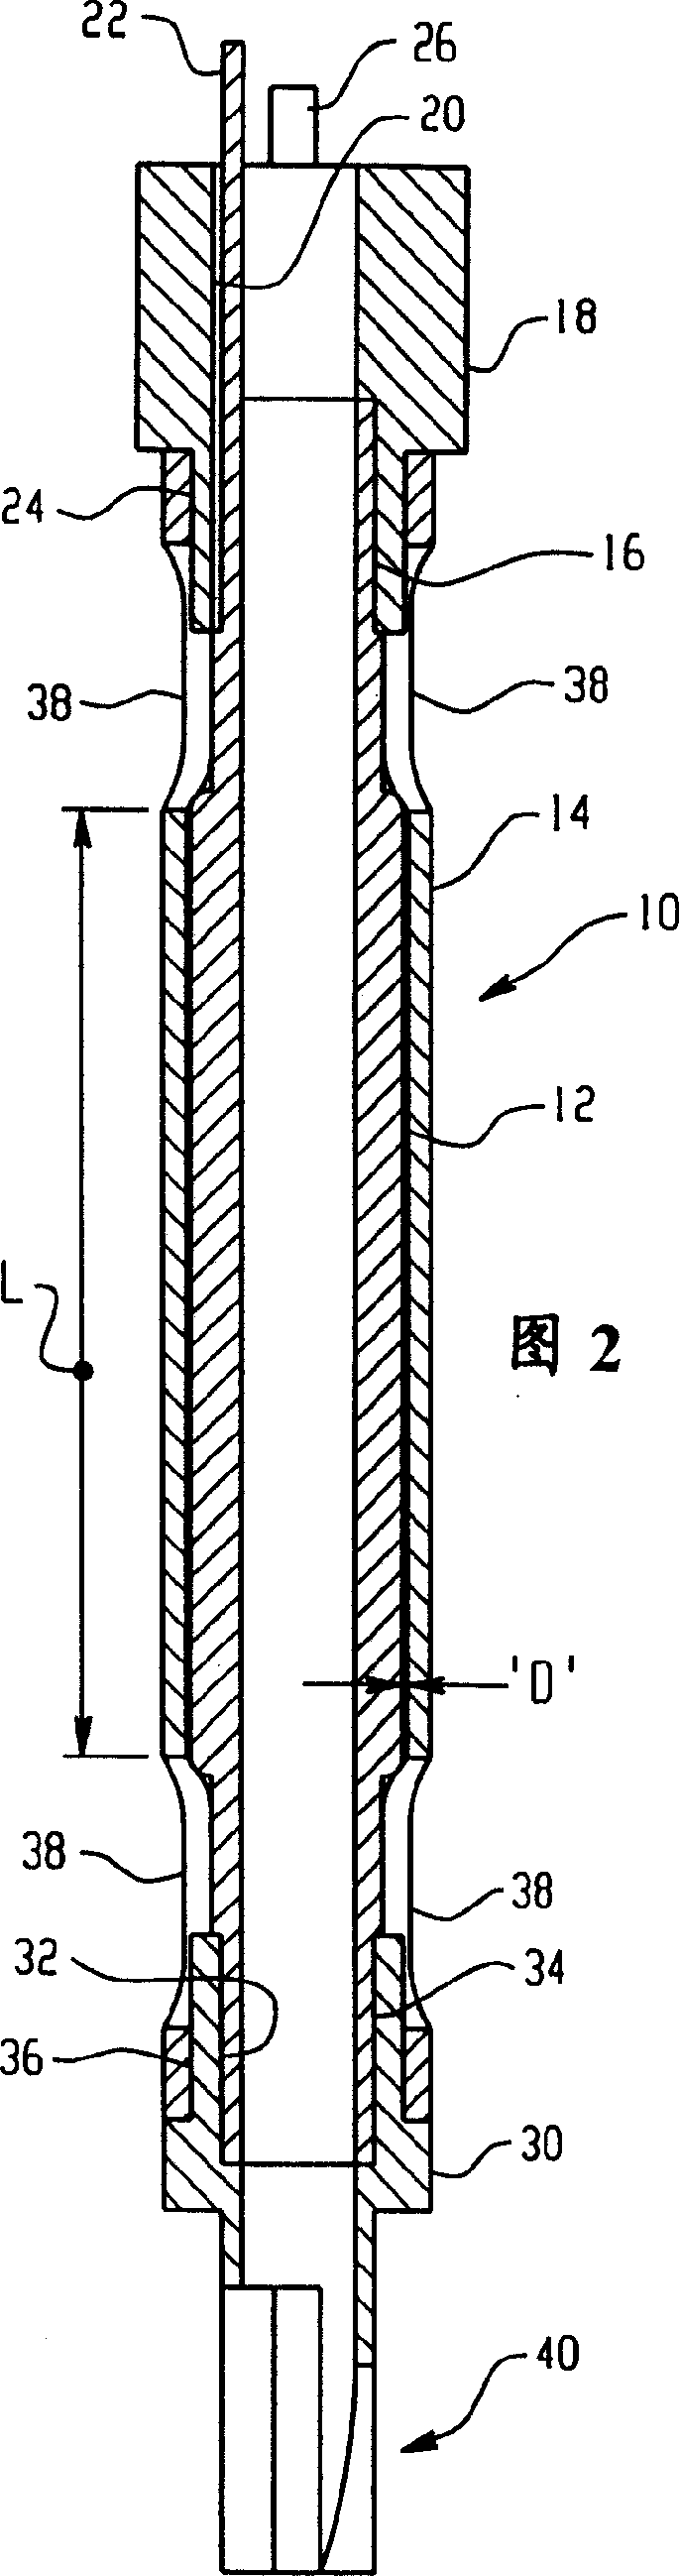 Probe assembly for a fluid condition monitor and method of making same